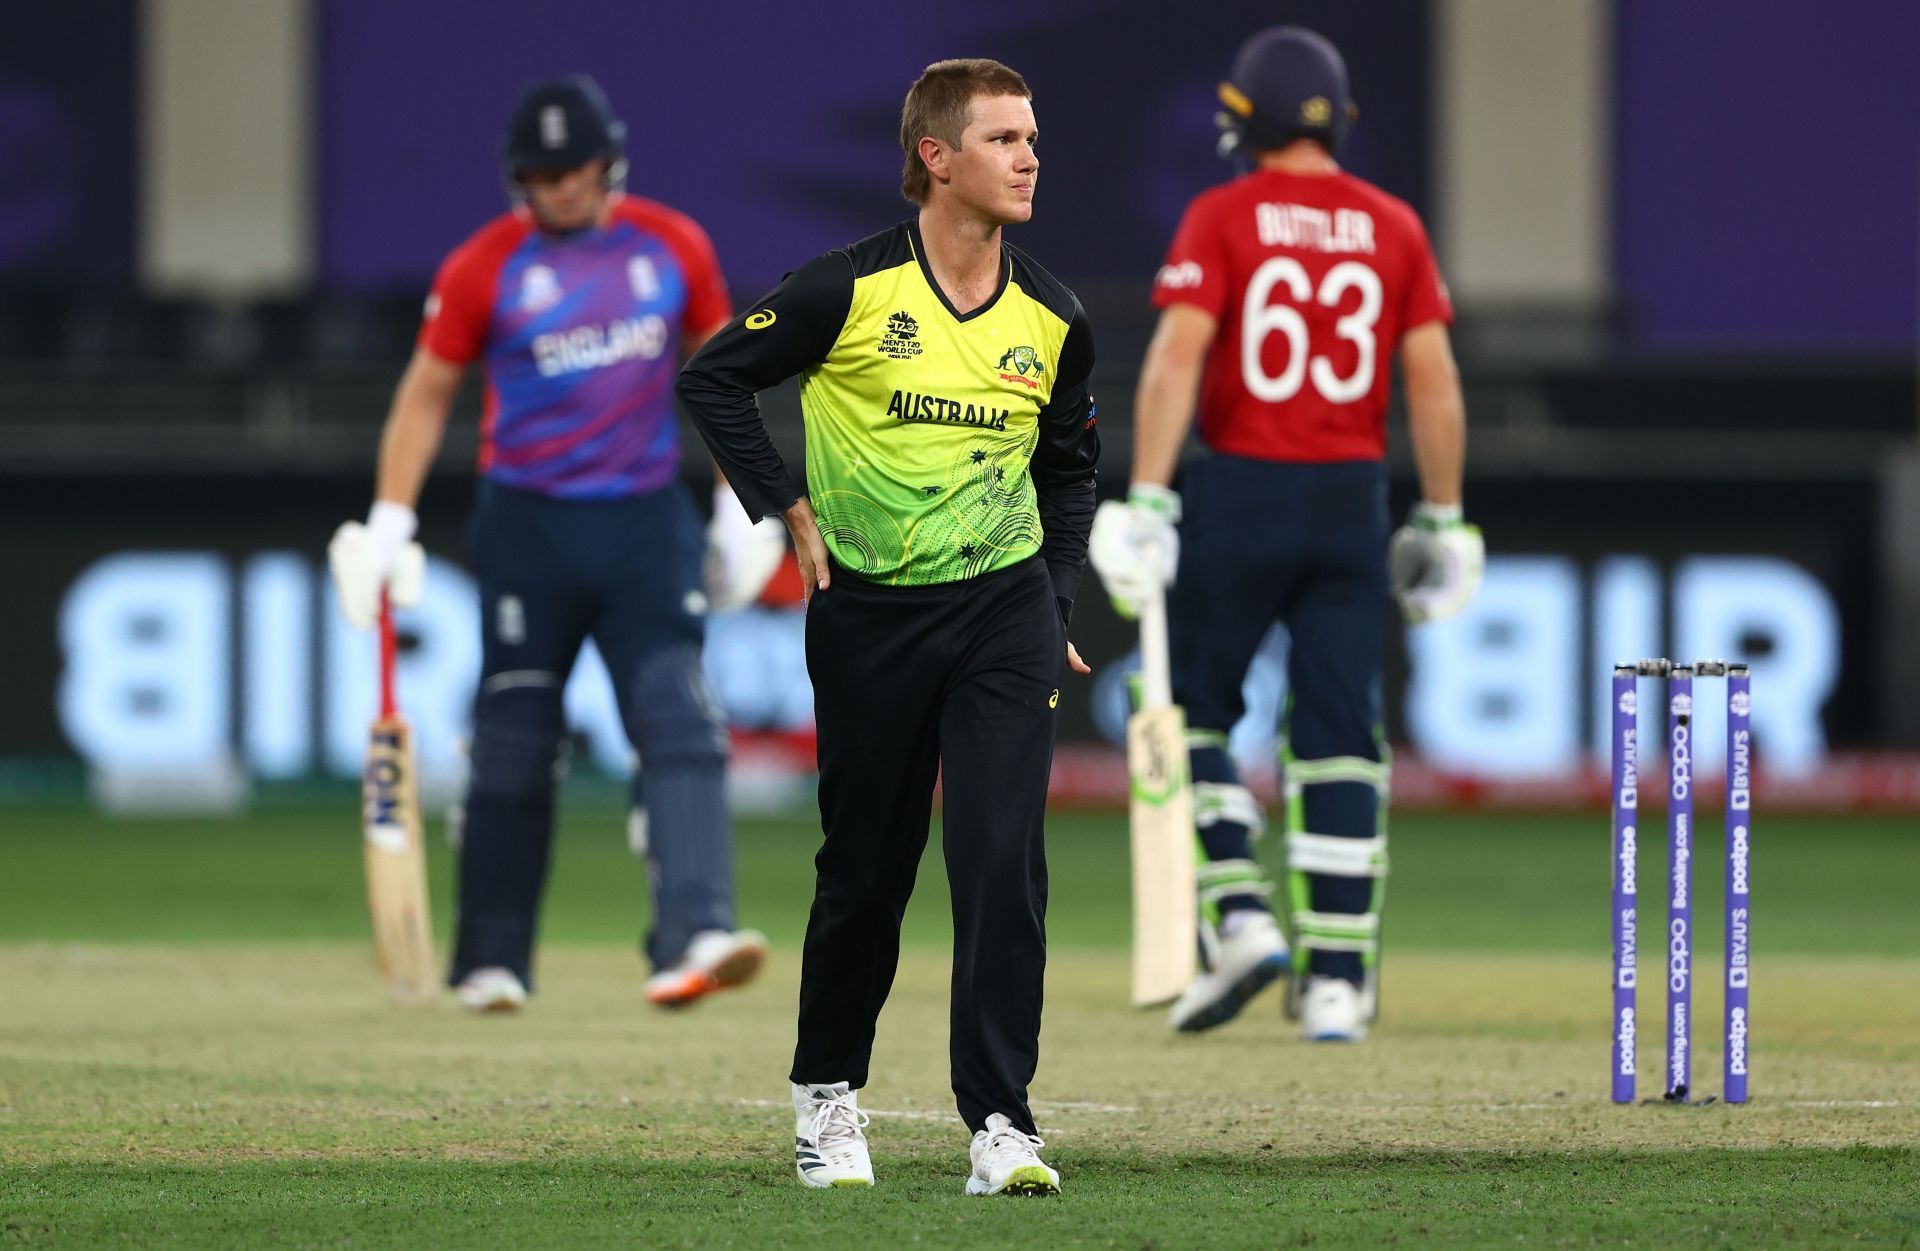 Adam Zampa picked up 13 wickets in ICC T20 World Cup 2021